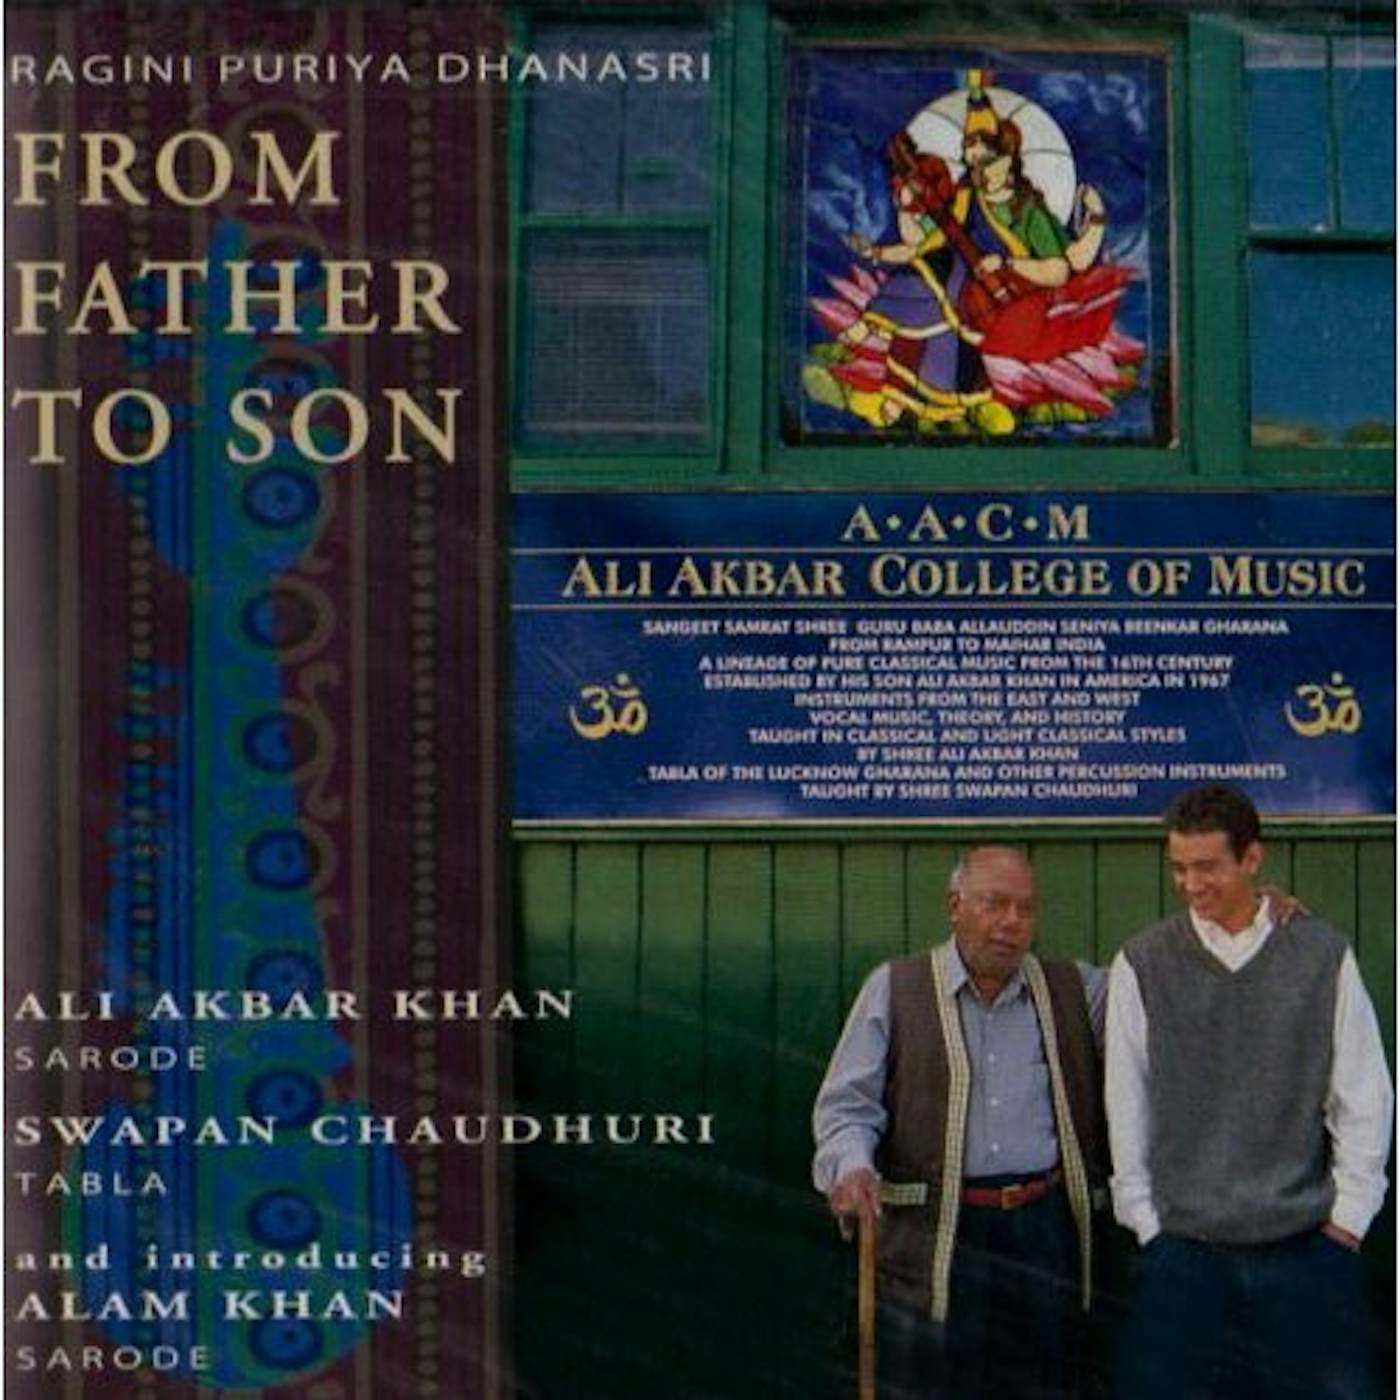 Ali Akbar Khan FROM FATHER TO SON CD